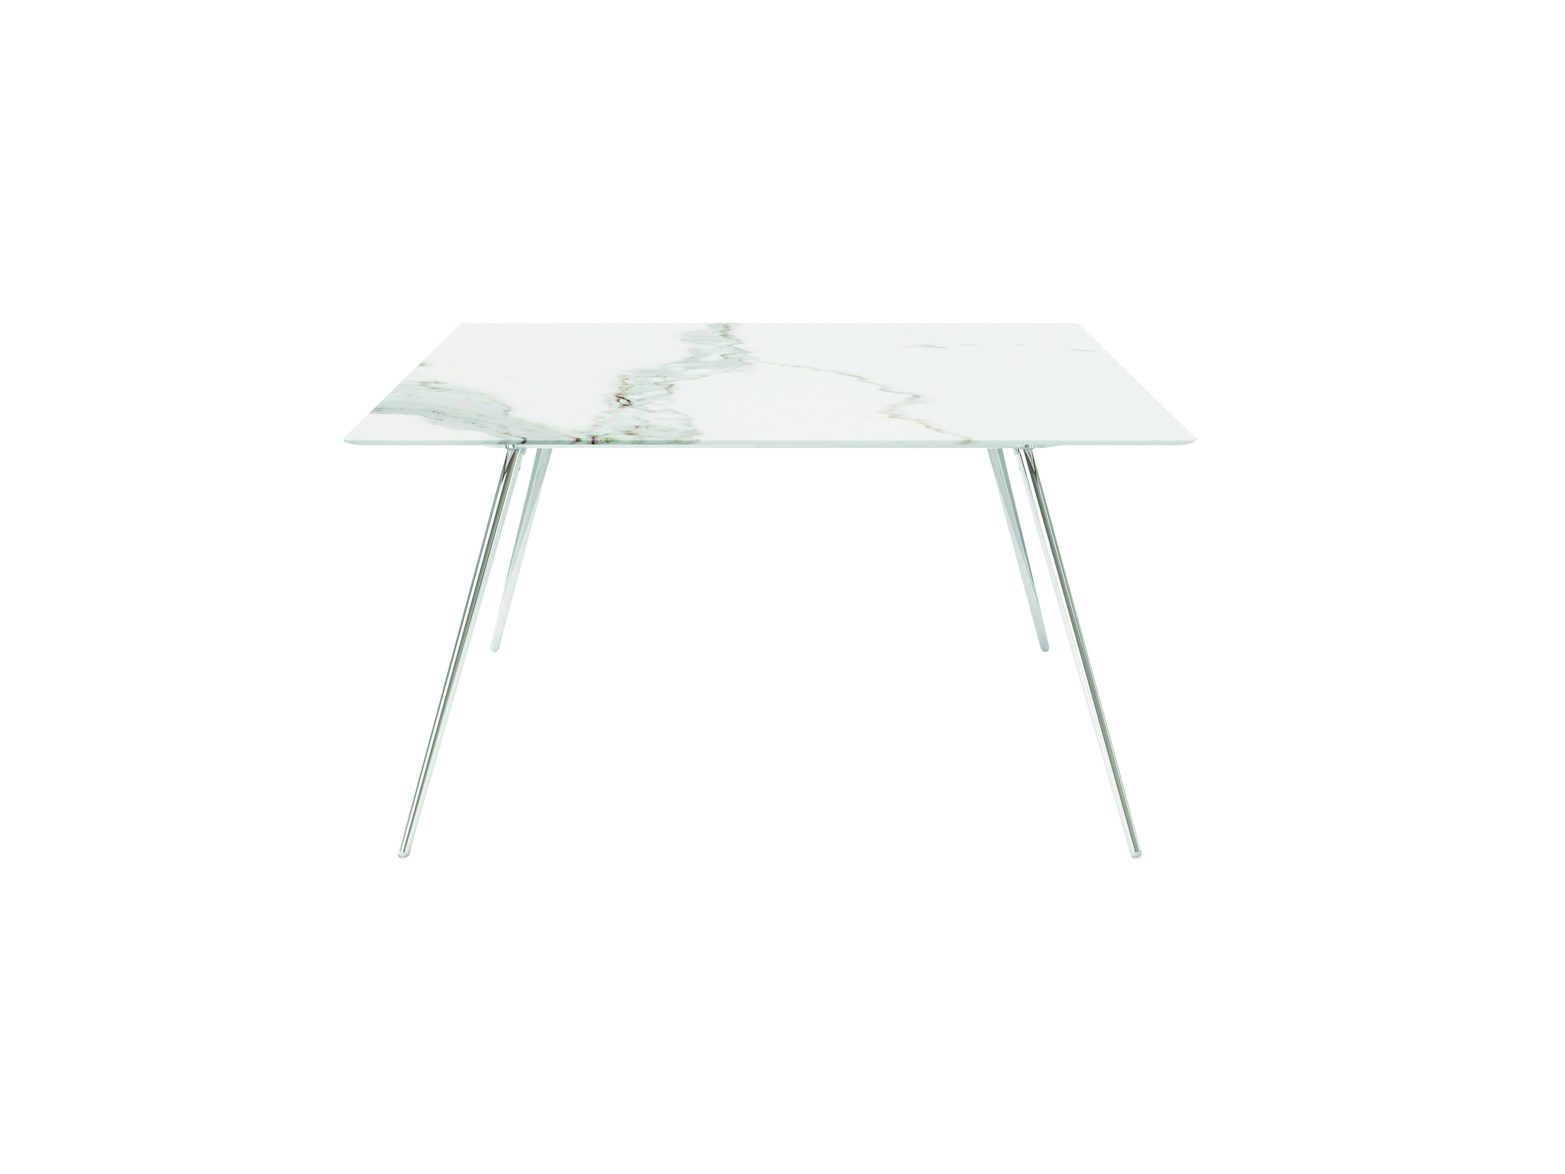 Stay Table Ferme Cappellini 2